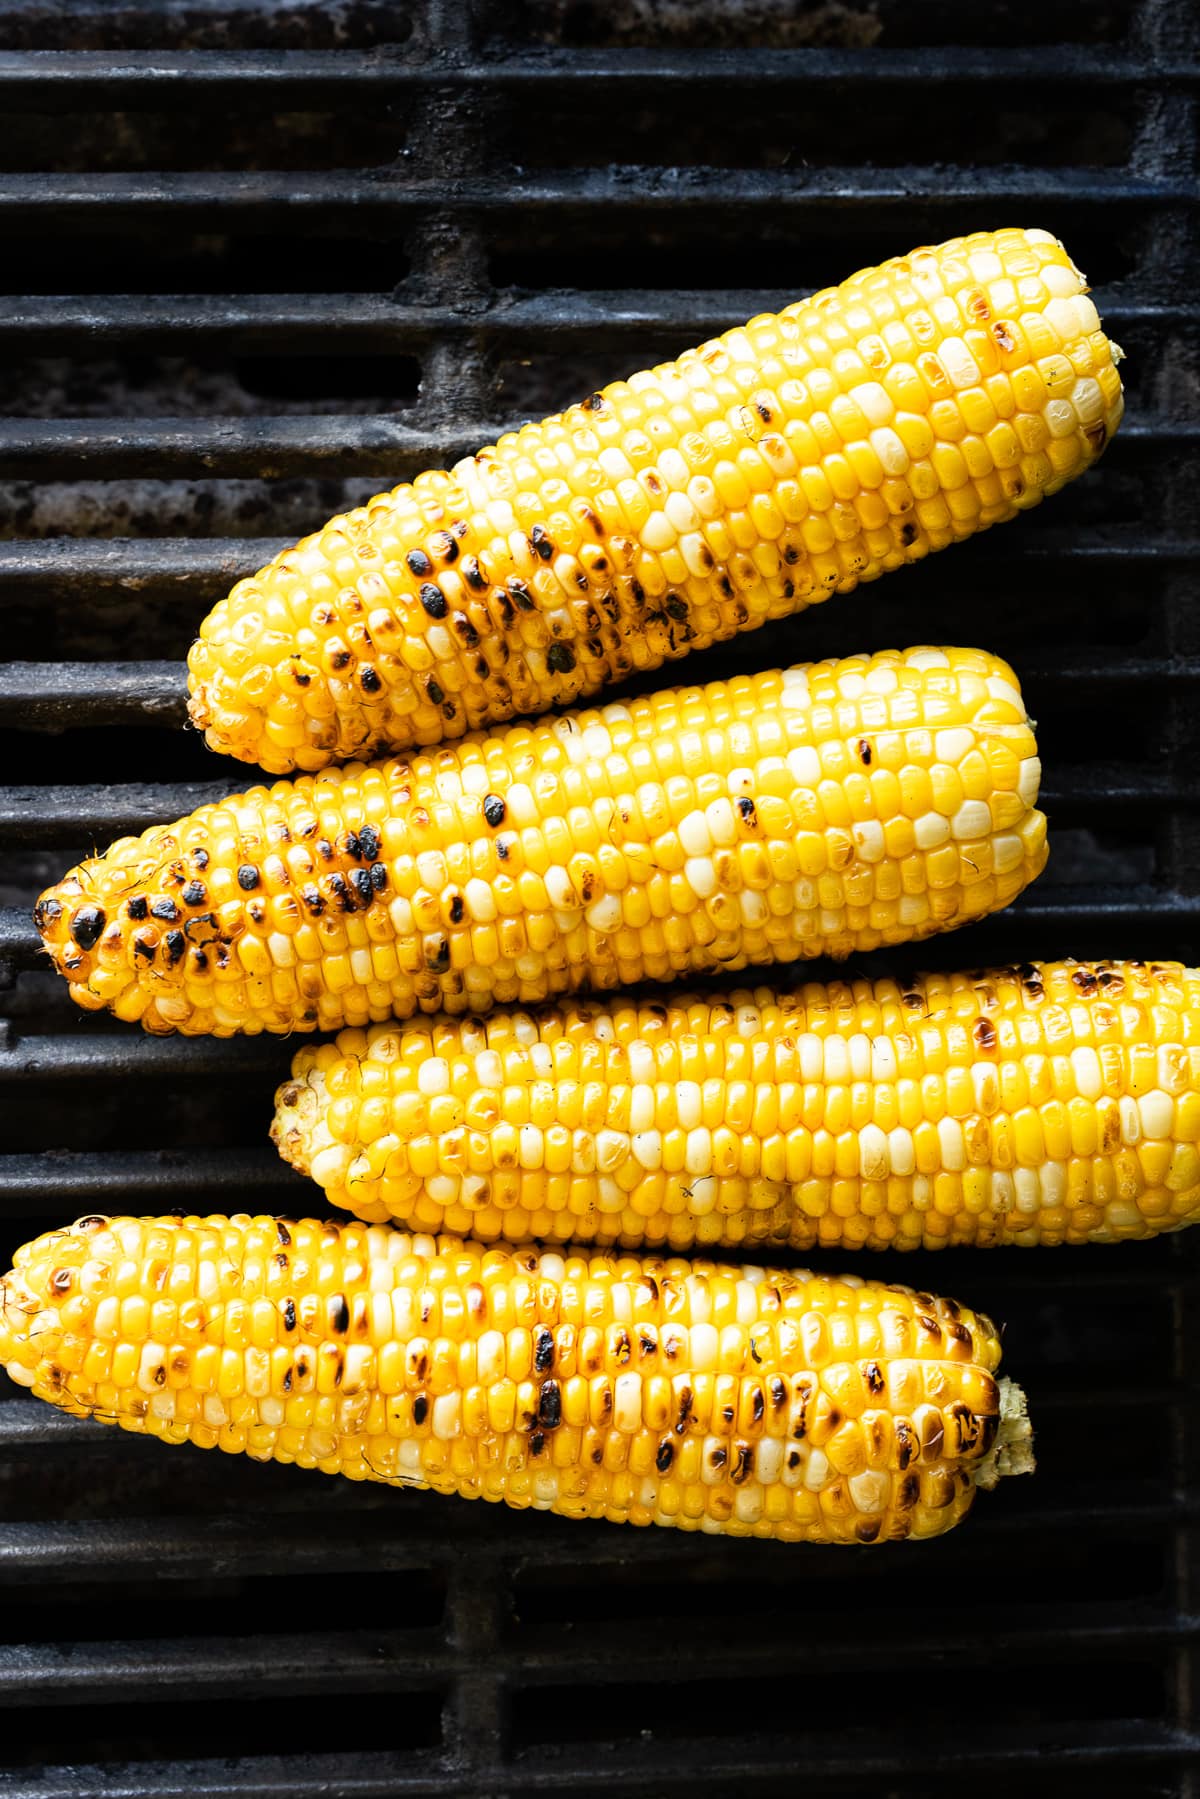 How To Grill Corn on The Cob (Two Ways)